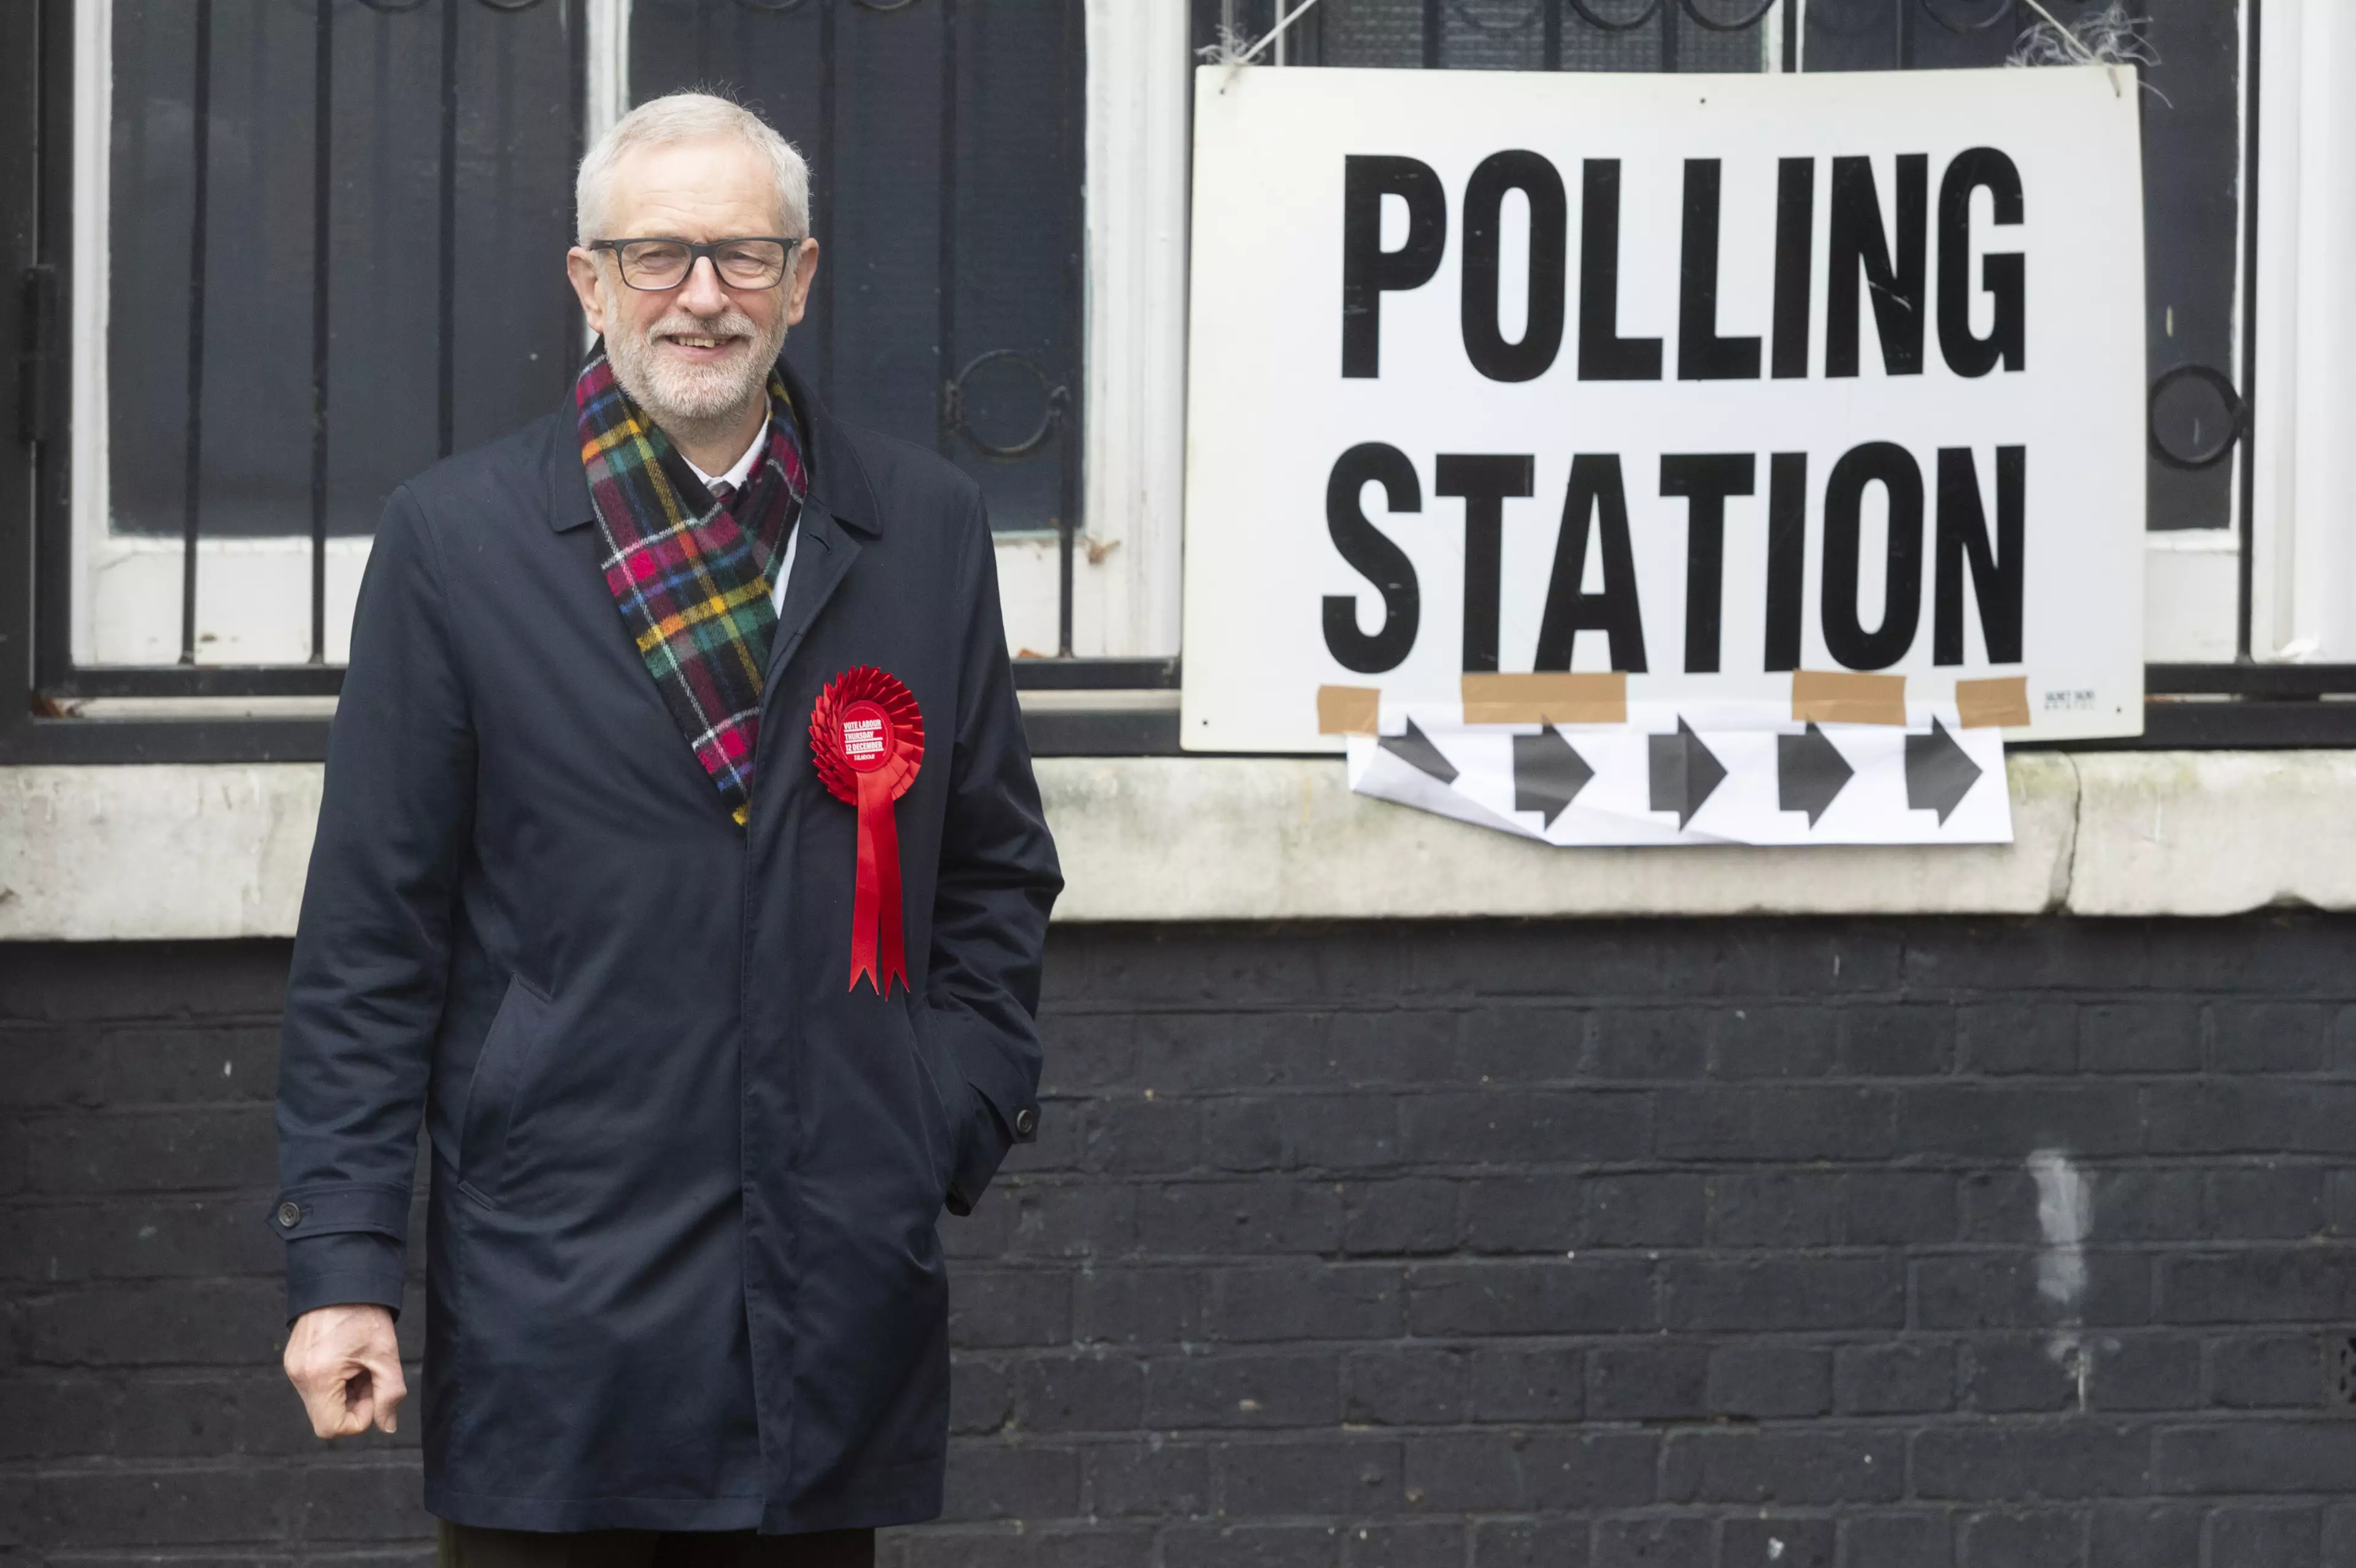 Labour Party leader Jeremy Corbyn casting his vote earlier.